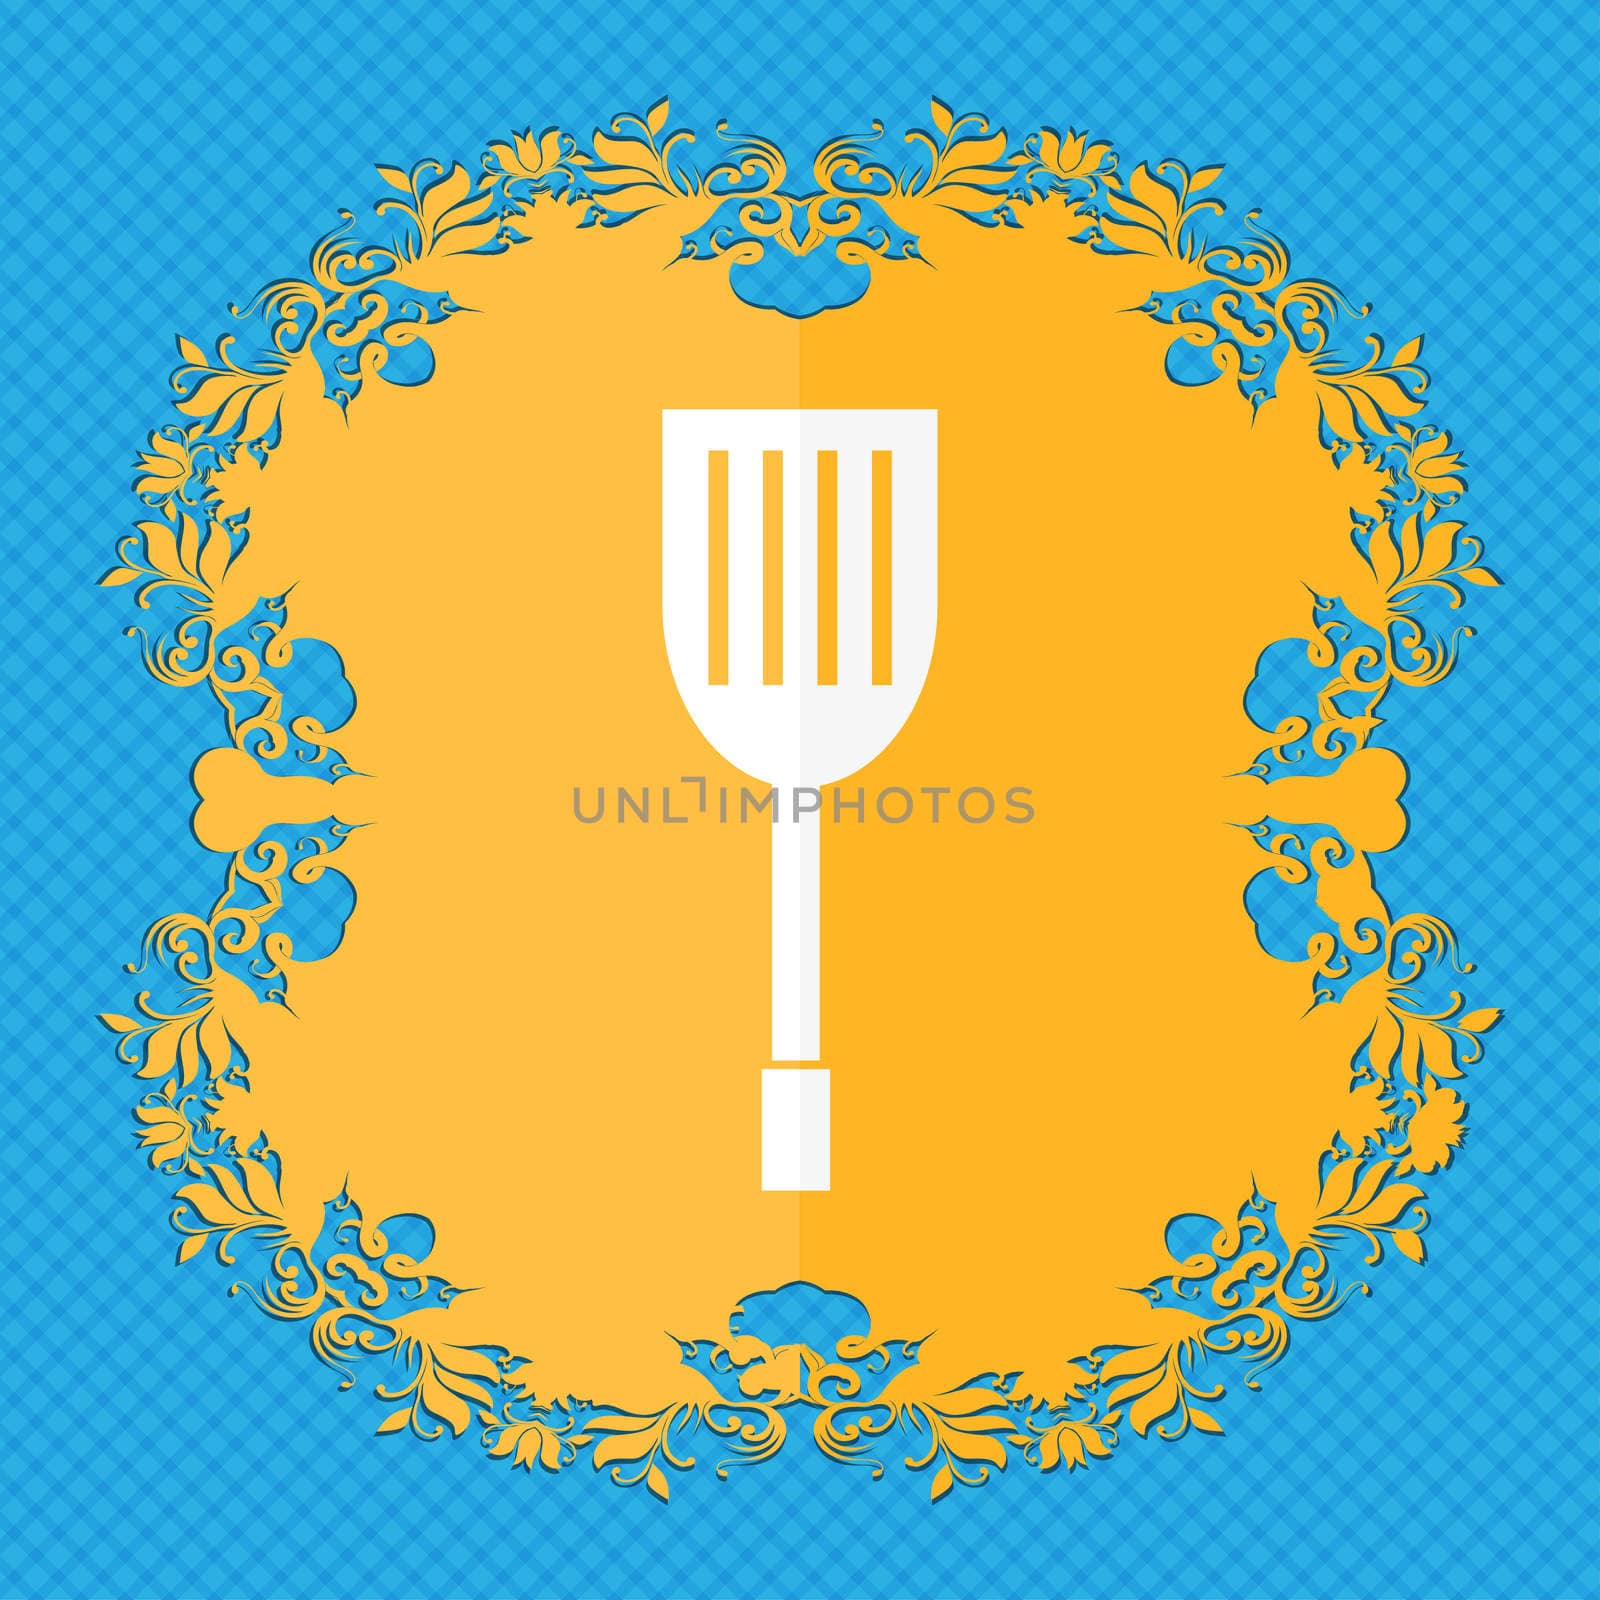 Kitchen appliances icon sign. Floral flat design on a blue abstract background with place for your text. illustration